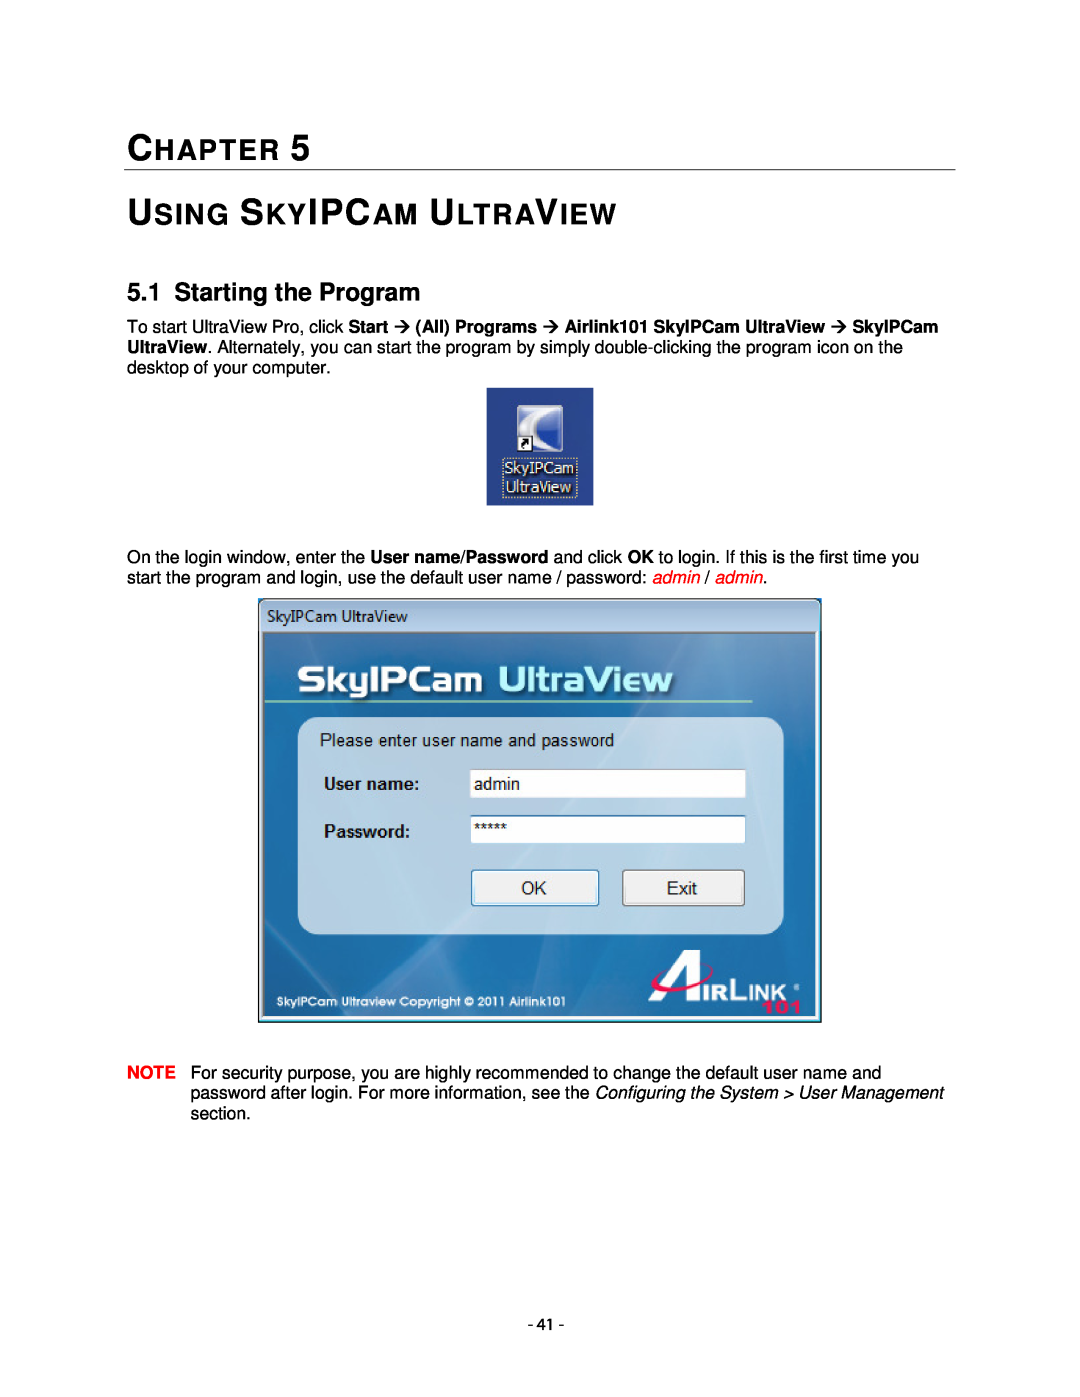 Airlink101 AICN1747W user manual Using Skyipcam Ultraview, Starting the Program, Chapter 